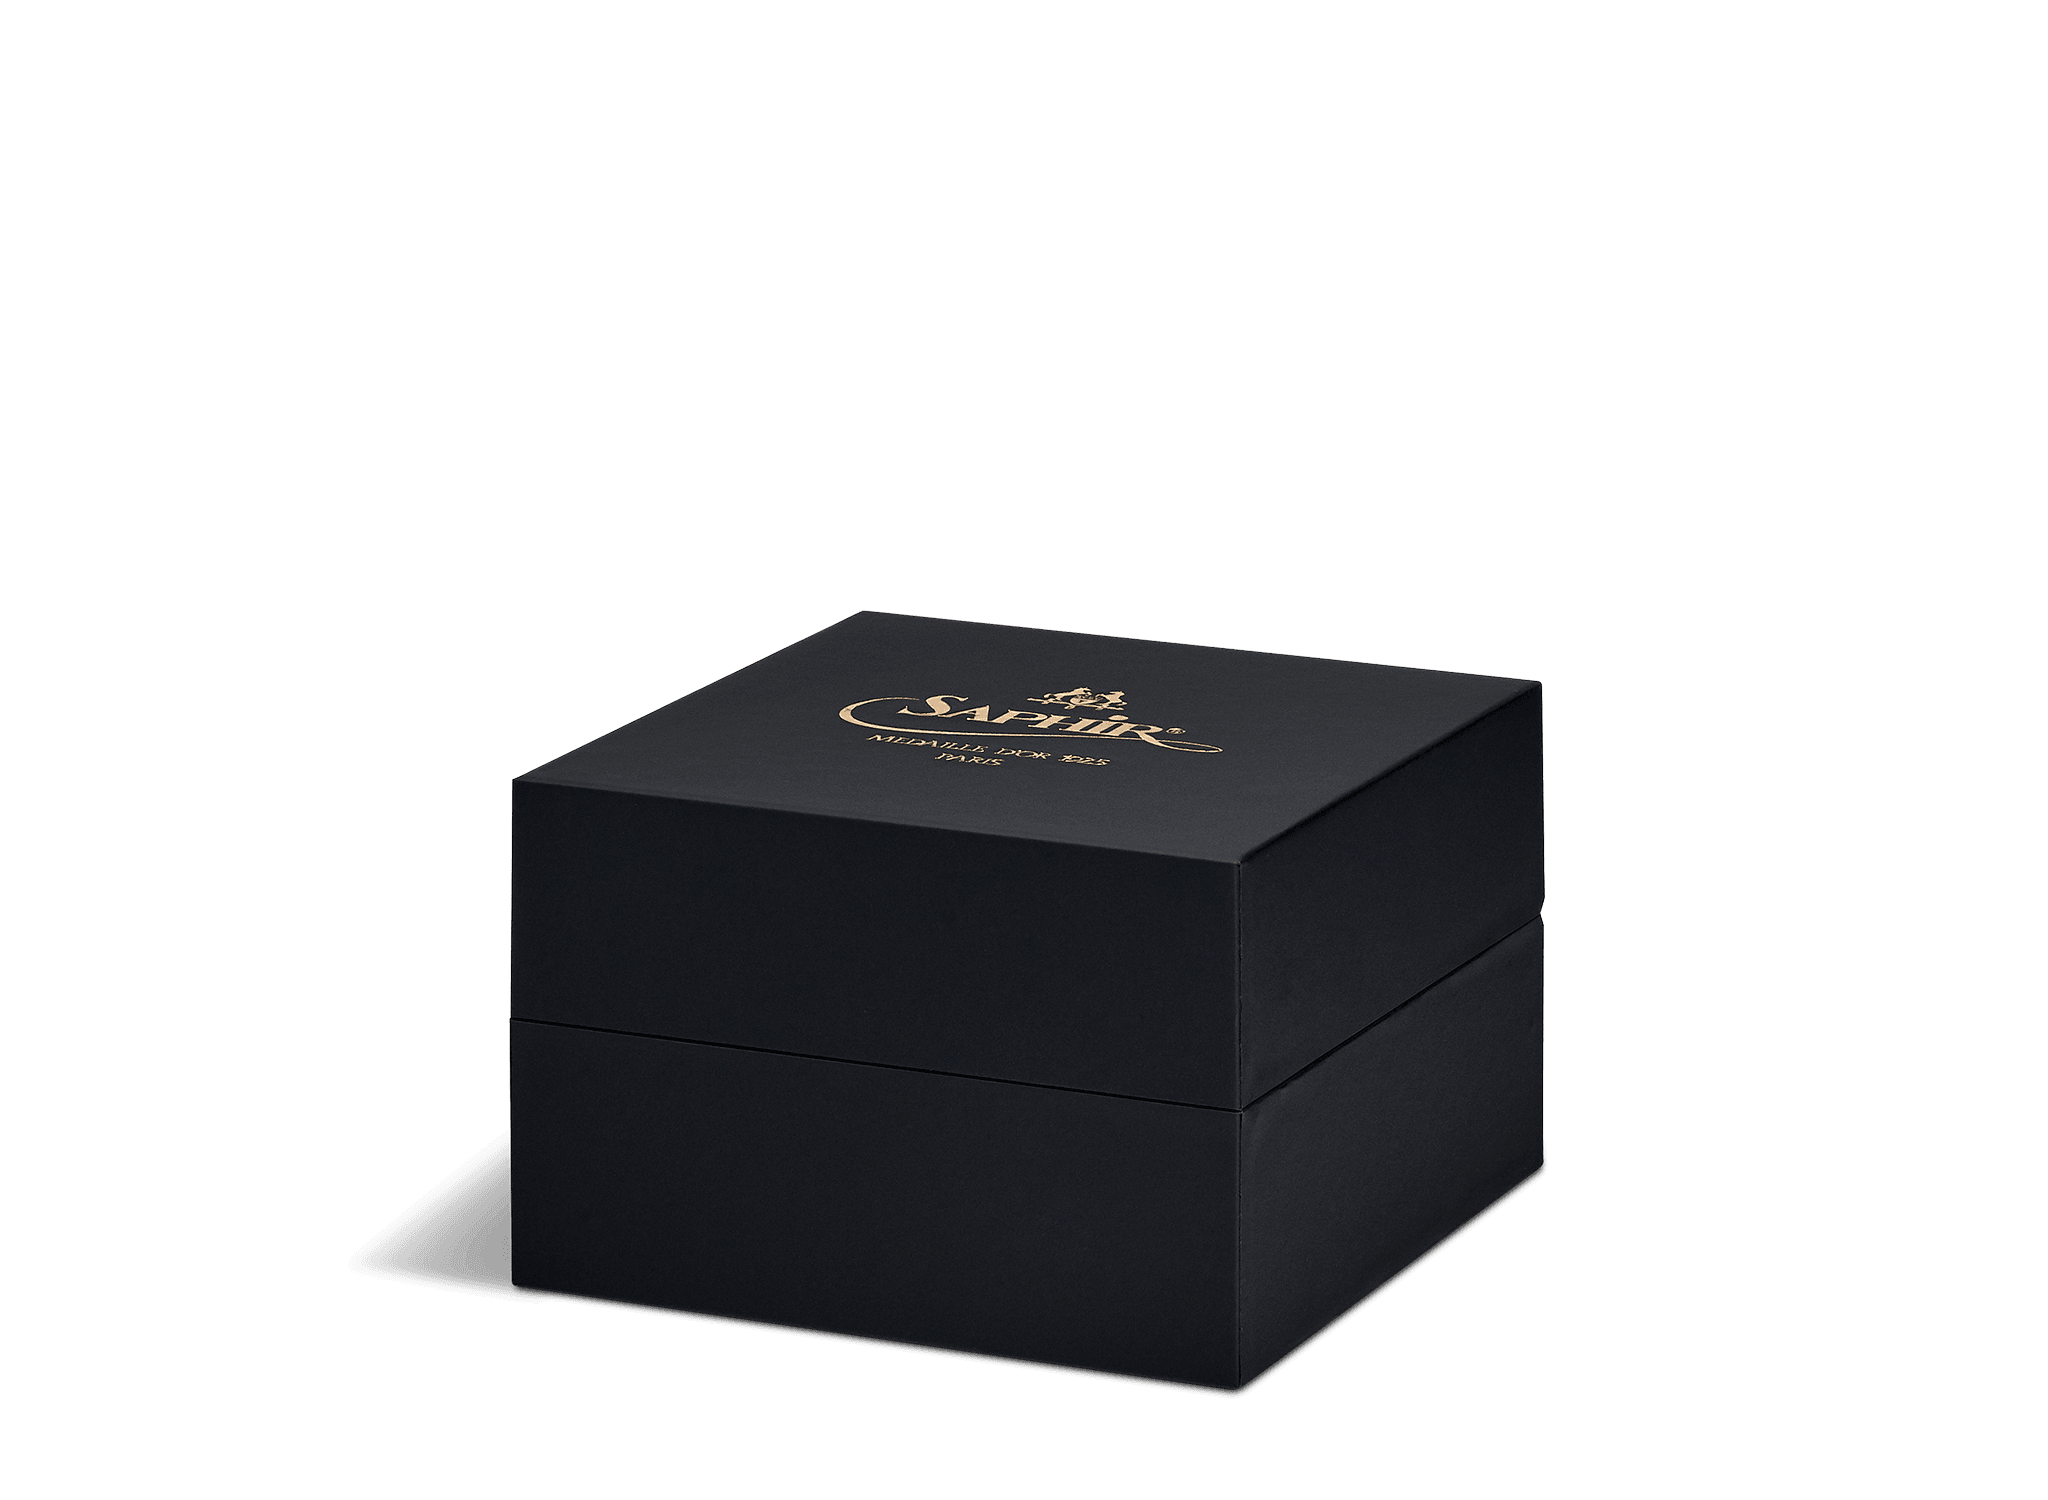 Saphir Médaille d'Or Groom box - Rosewood finish — The Shoe Care Shop